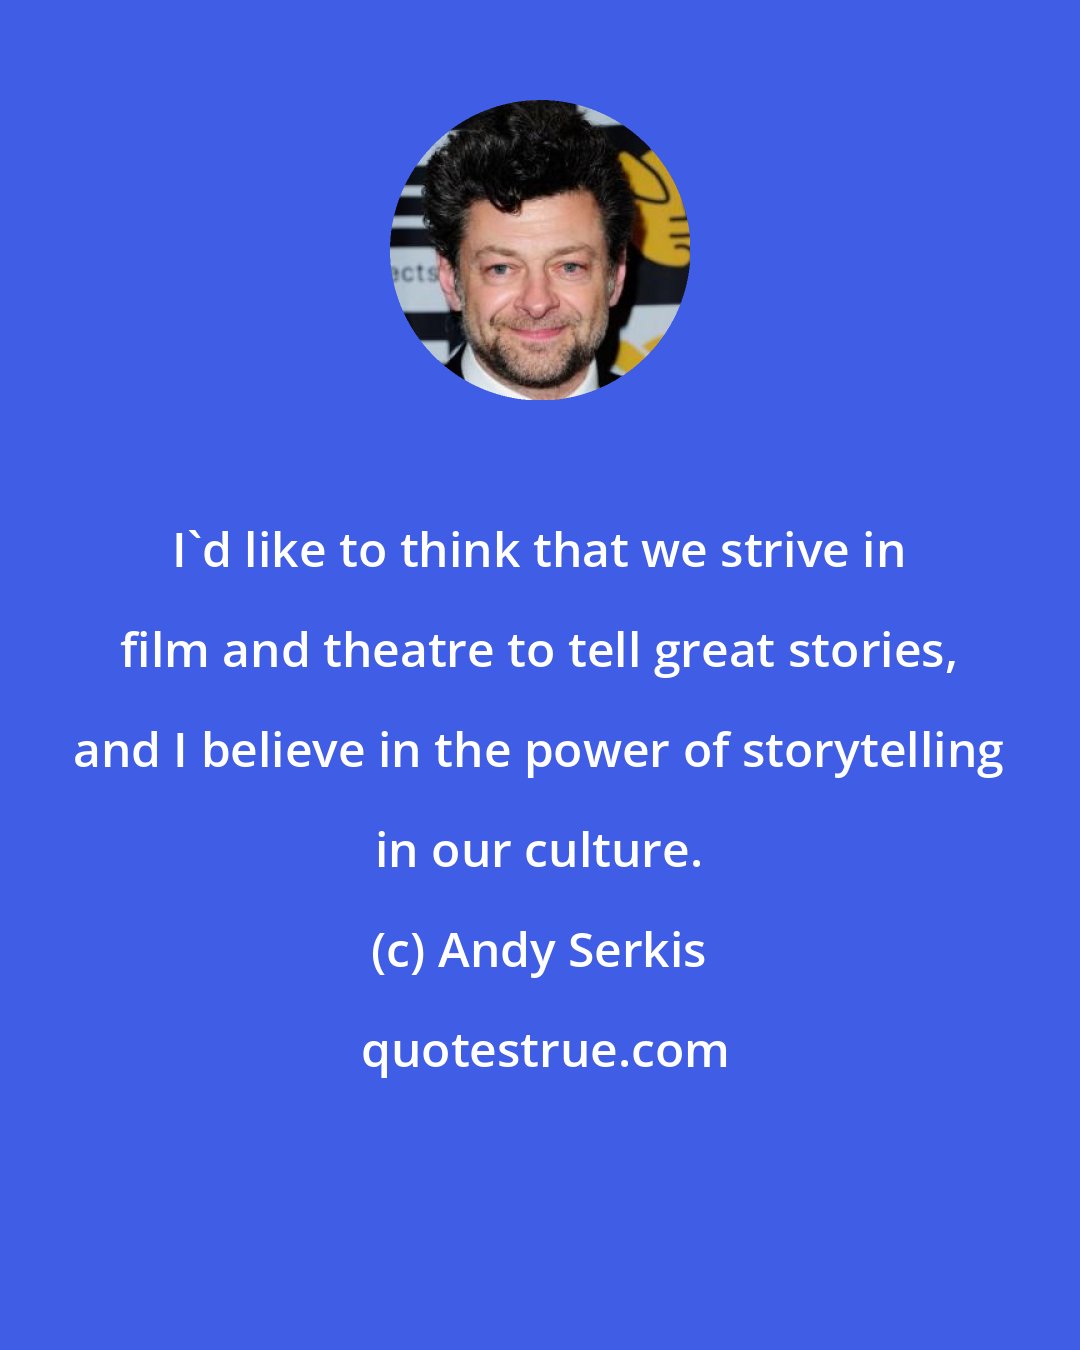 Andy Serkis: I'd like to think that we strive in film and theatre to tell great stories, and I believe in the power of storytelling in our culture.